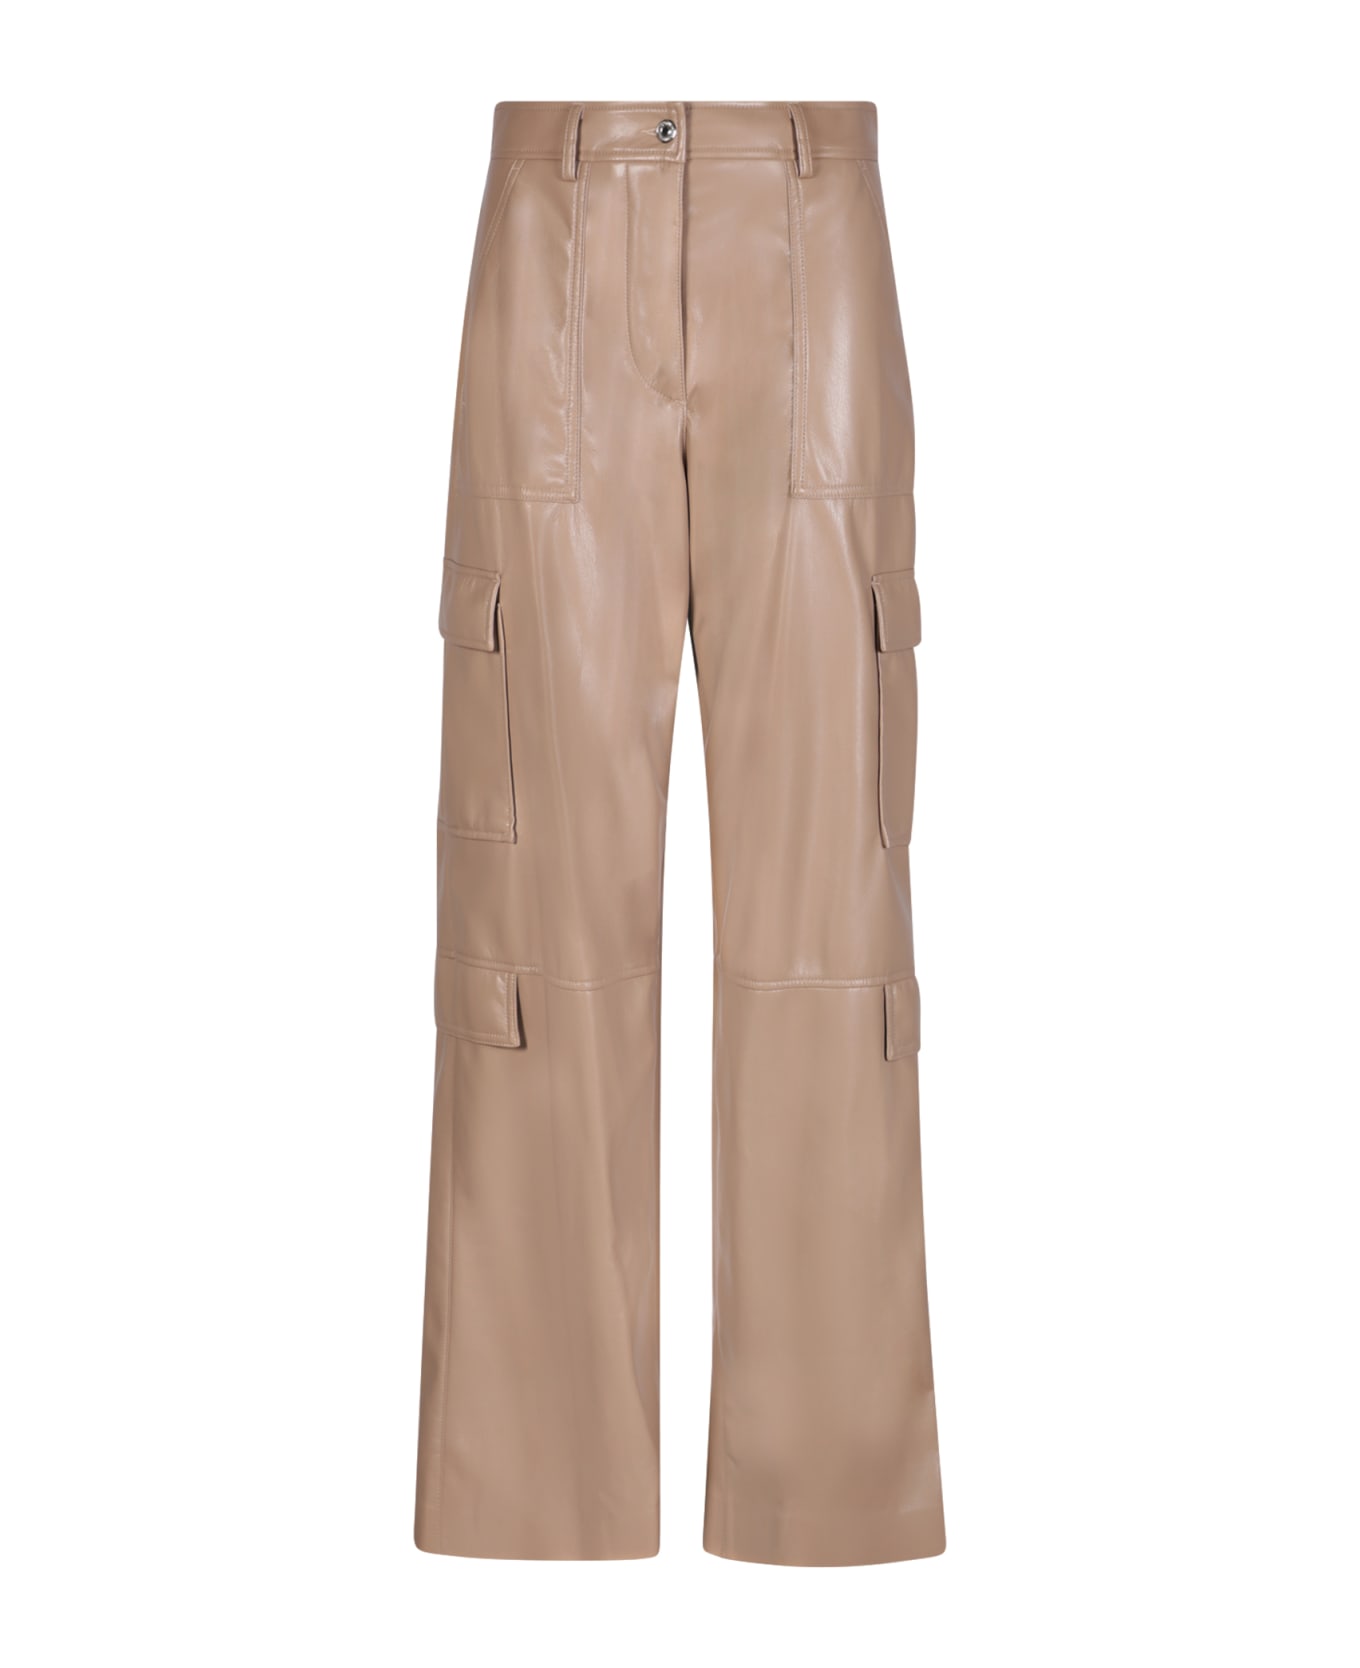 MSGM Soft Eco Leather Beige Cargo Trousers - Beige